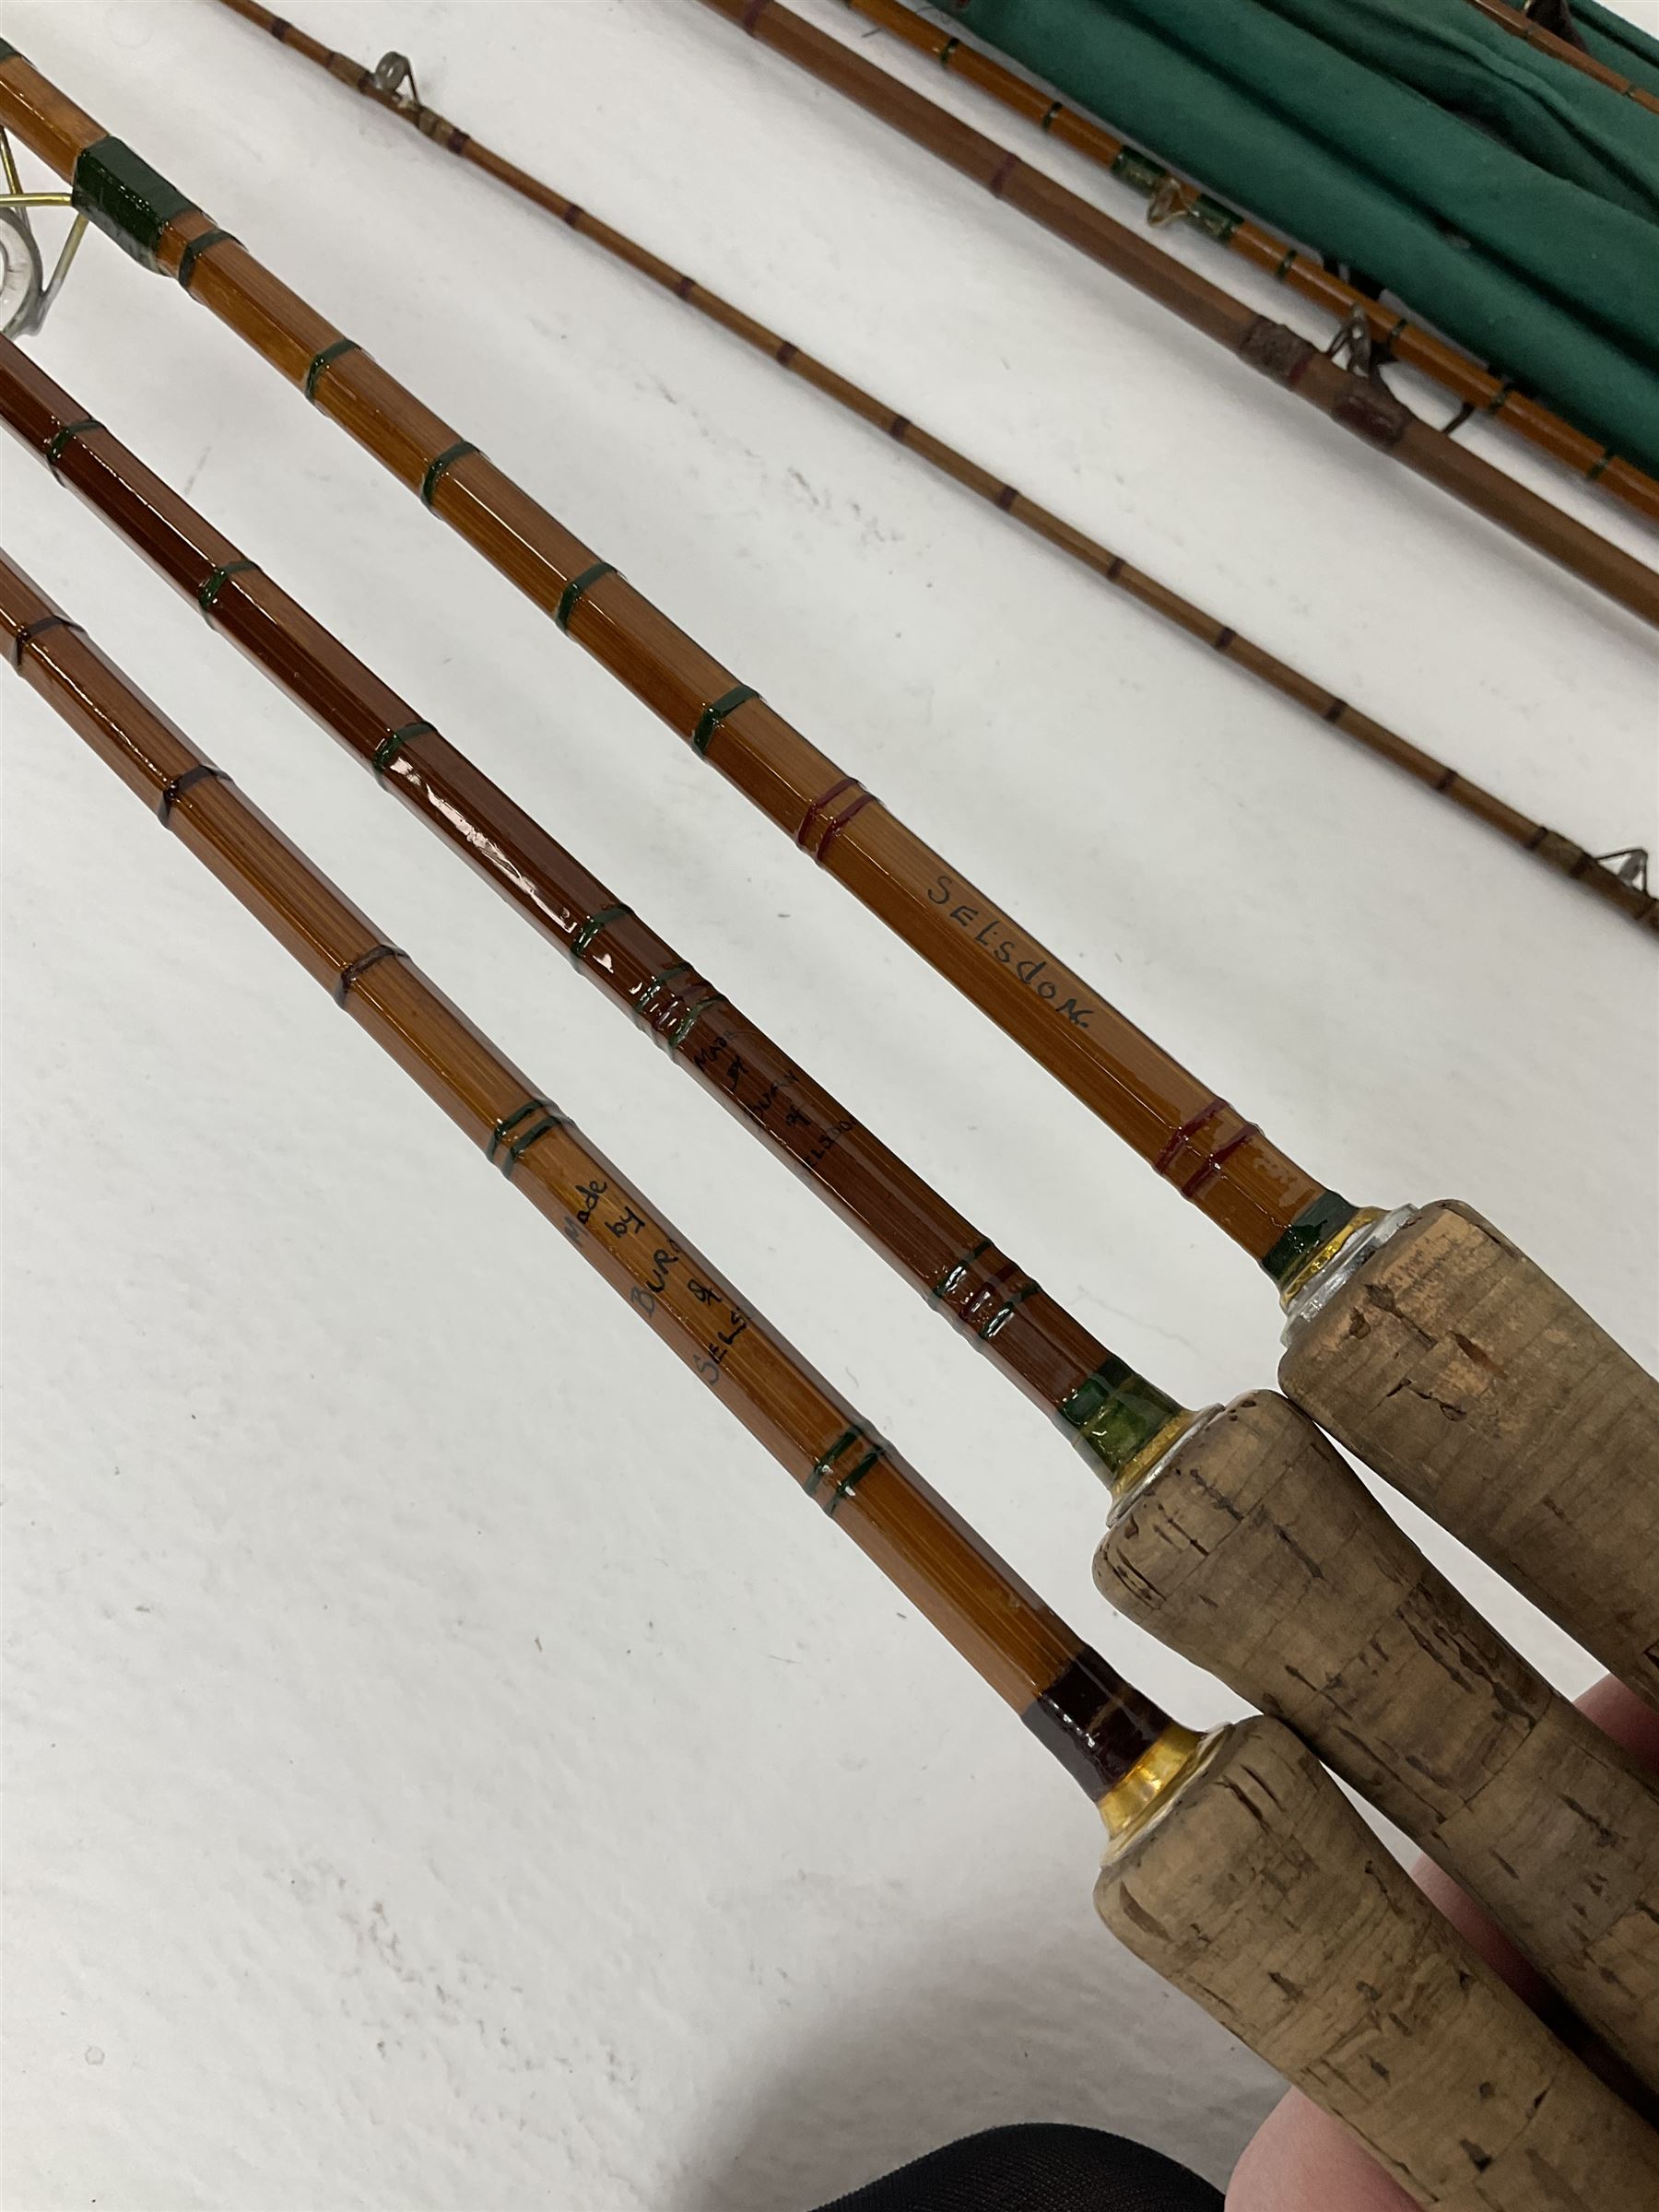 Four split cane fly fishing rods - Image 5 of 6